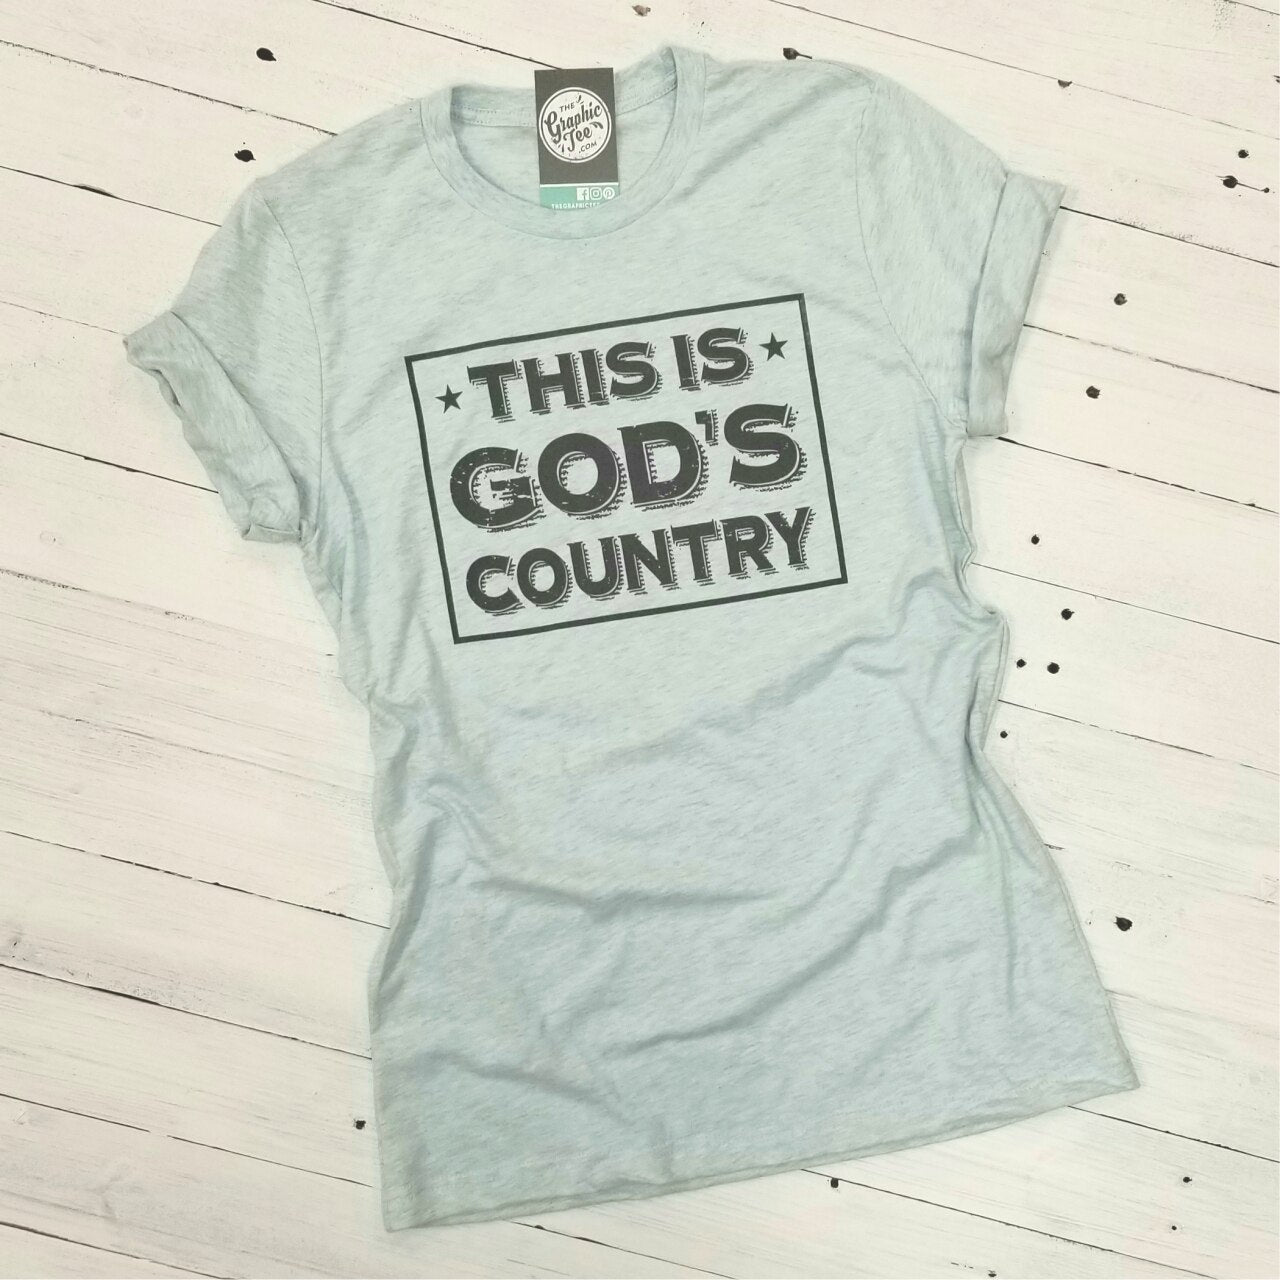 This is God's Country - Unisex Tee - The Graphic Tee